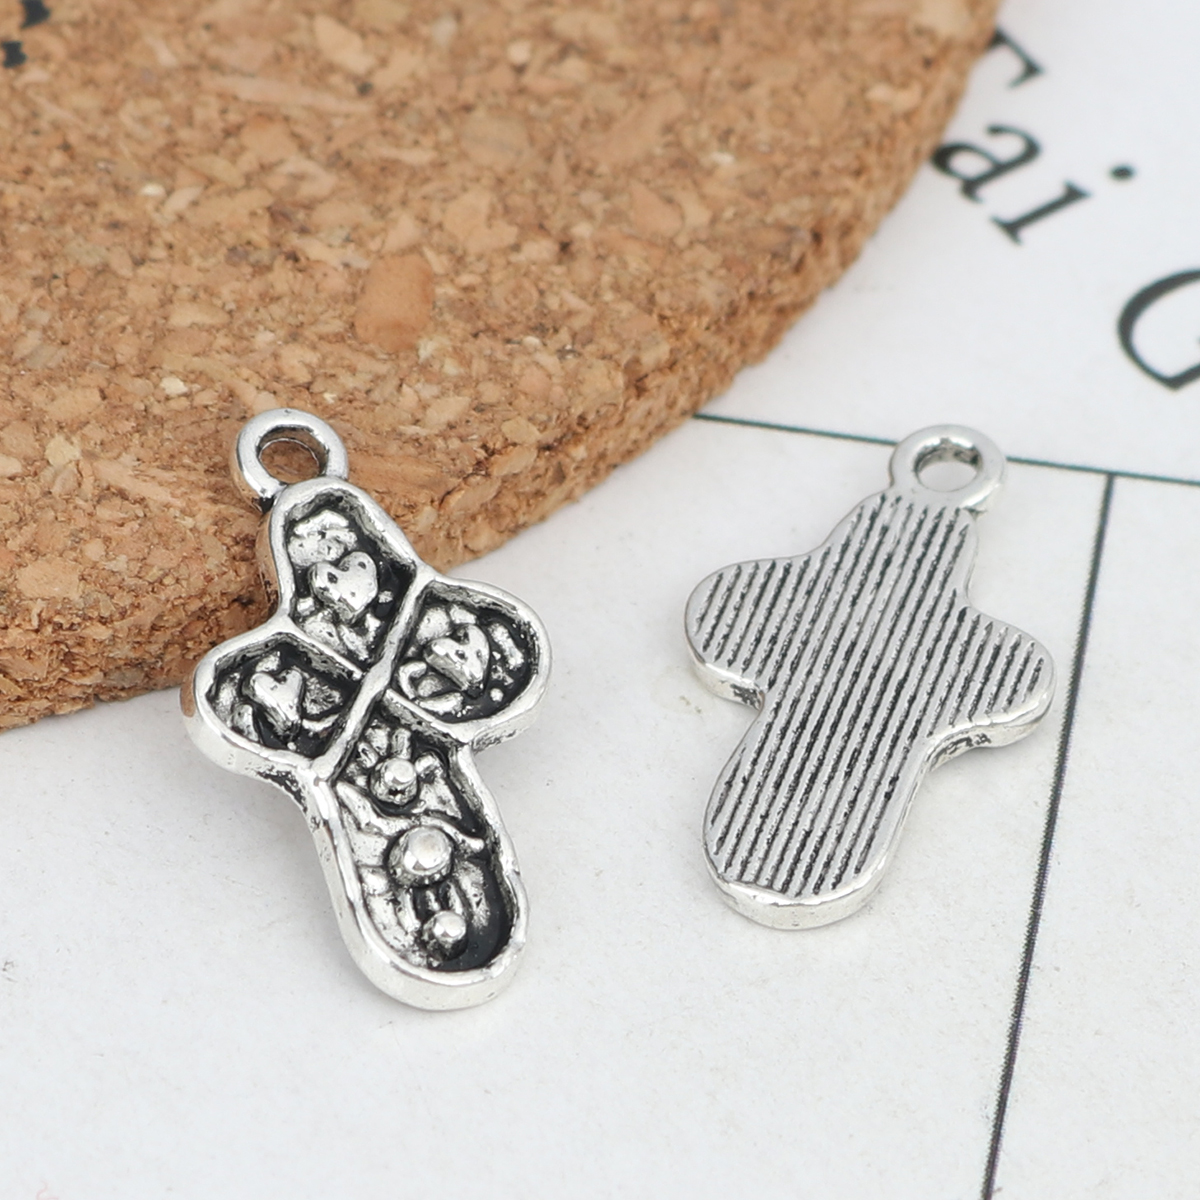 Picture of Zinc Based Alloy Charms Cross Antique Silver Heart 21mm x 12mm, 100 PCs